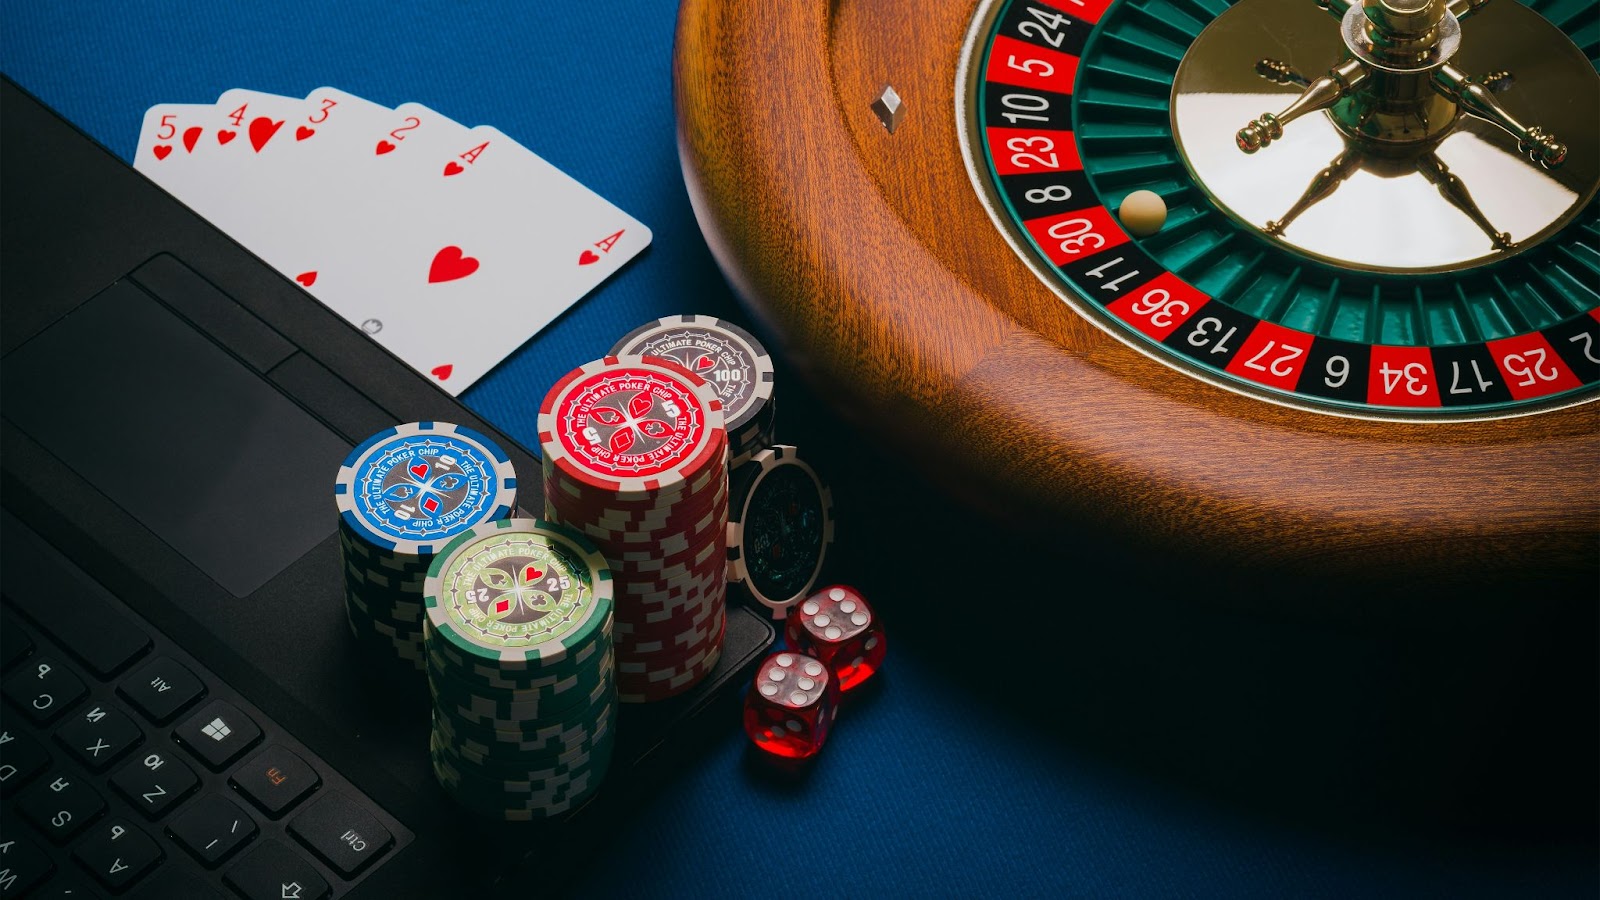 What rules should I follow when playing roulette?